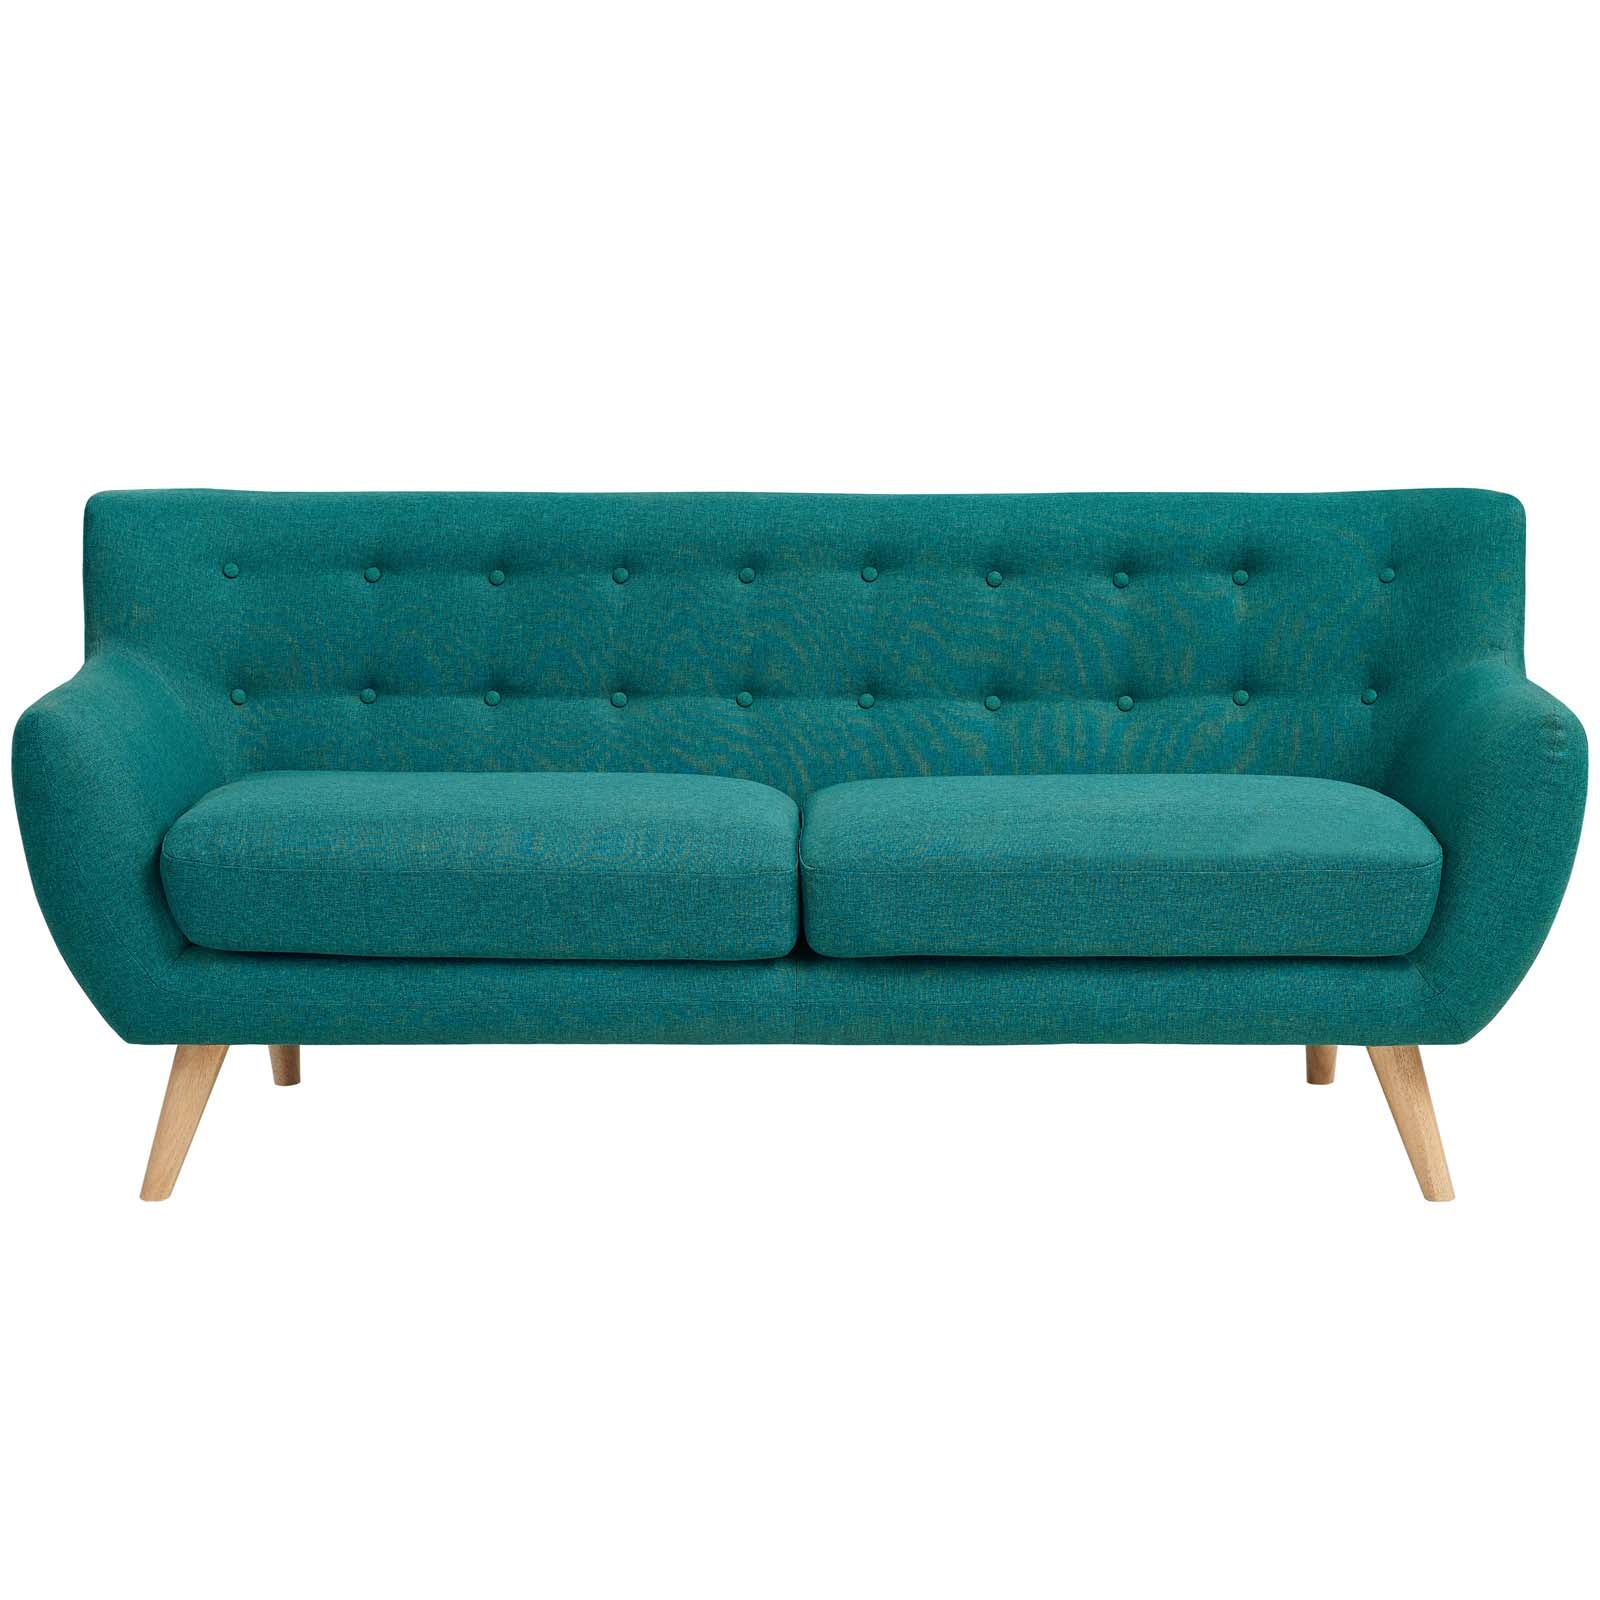 Modway Sofas & Couches - Remark Fabric Sofa Teal